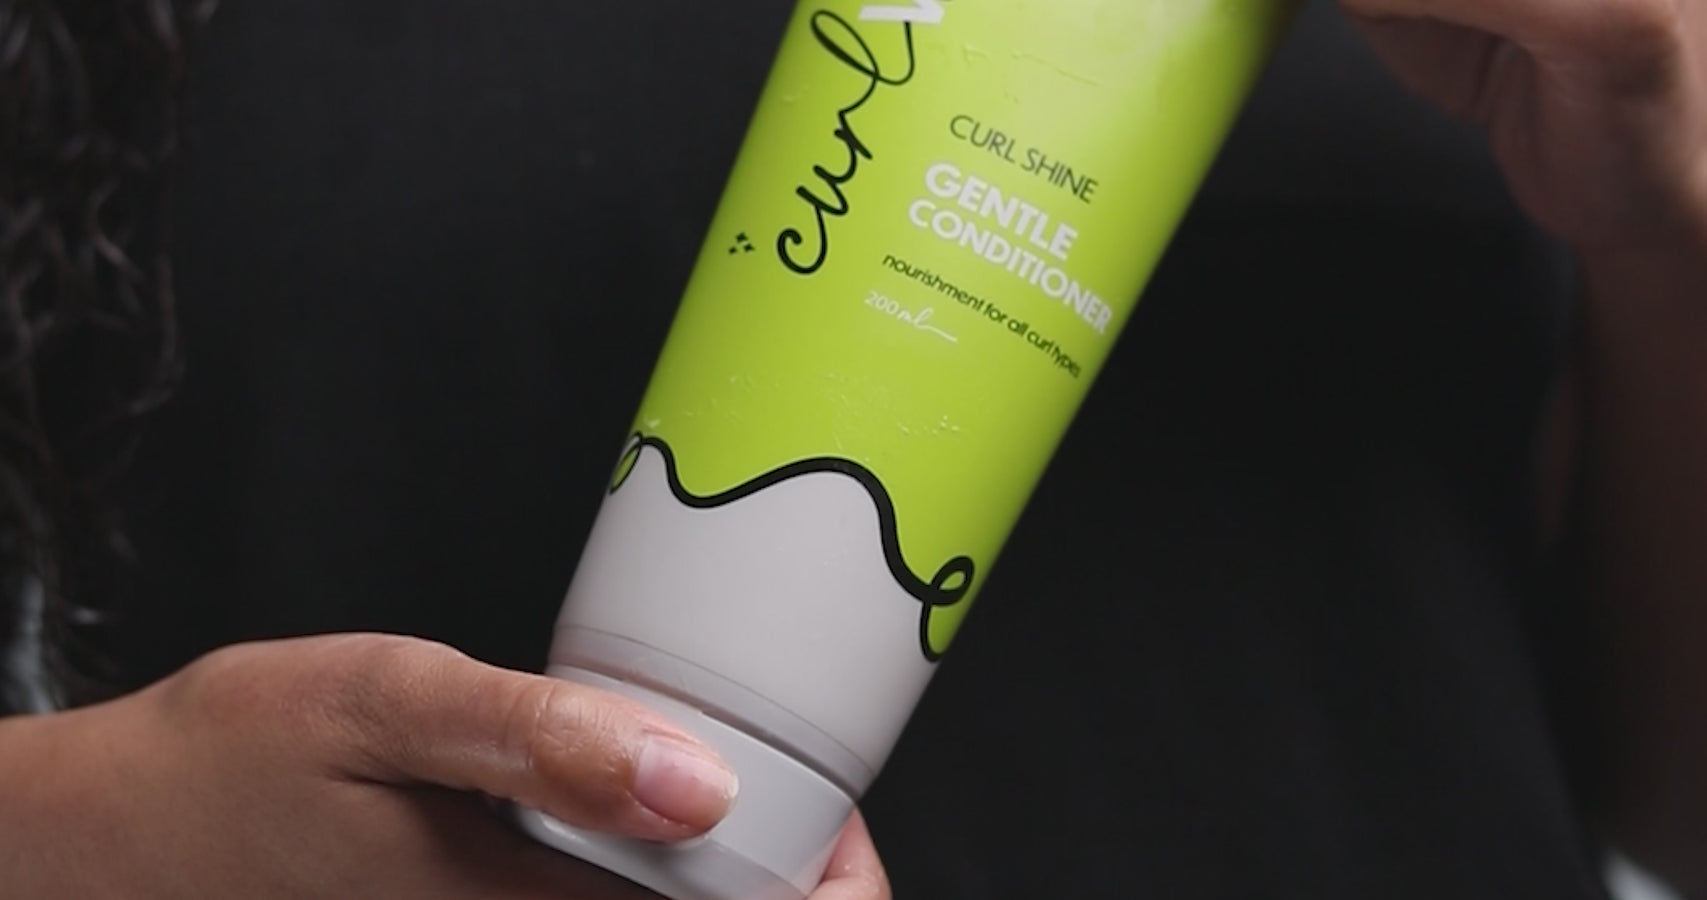 best conditioner for curly hair